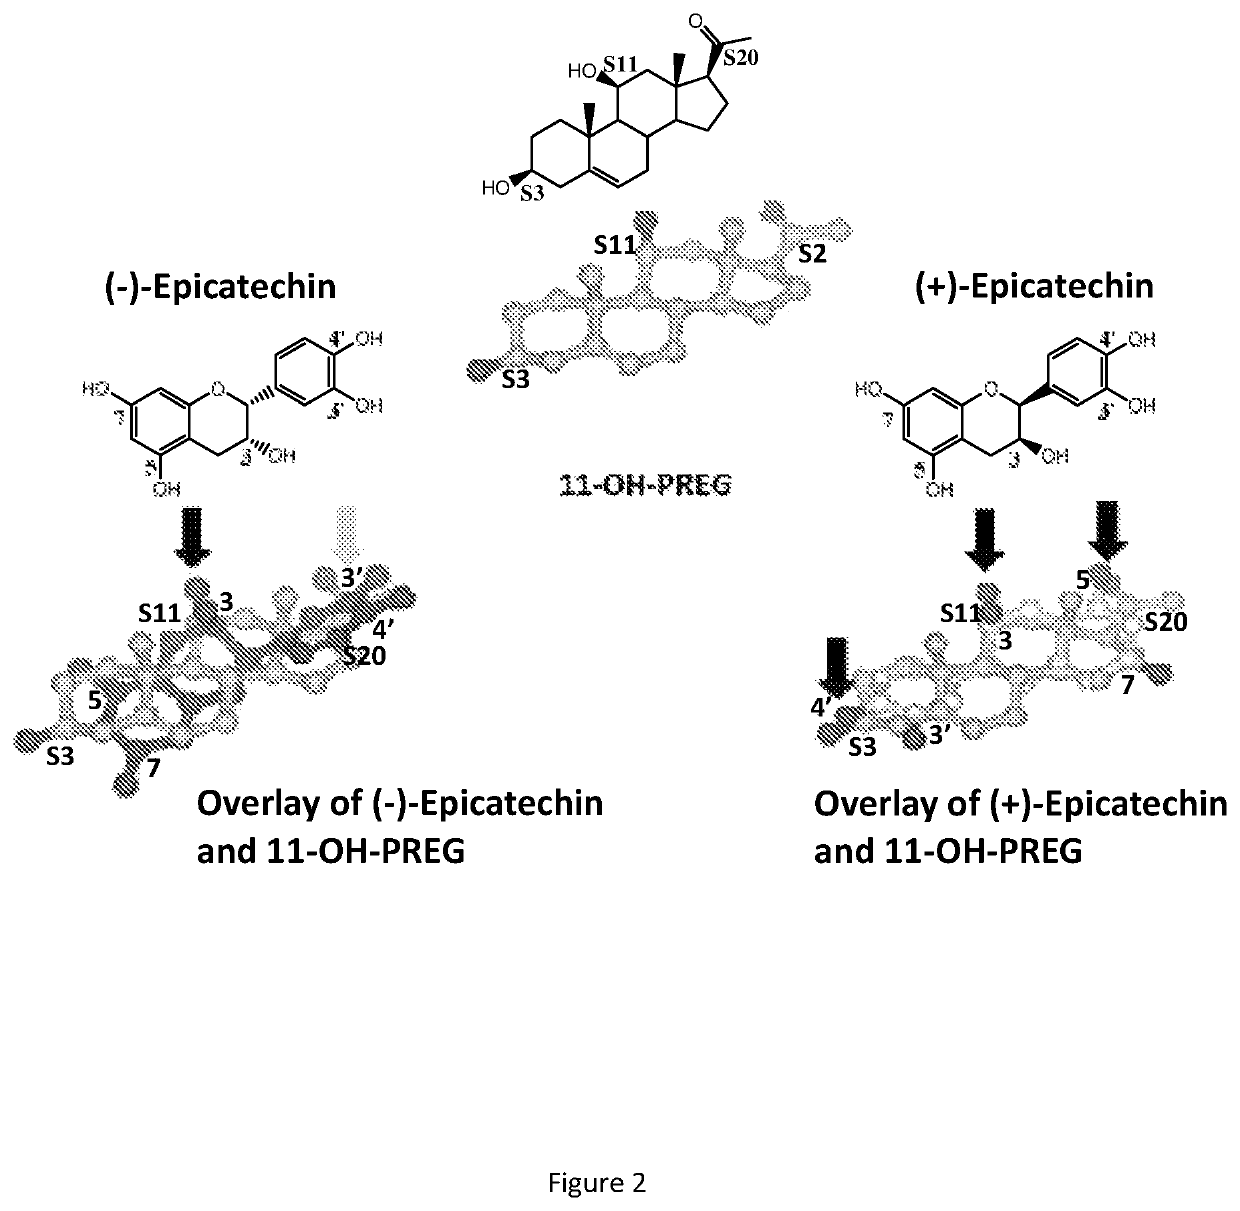 Utility of (+) epicatechin and their analogs